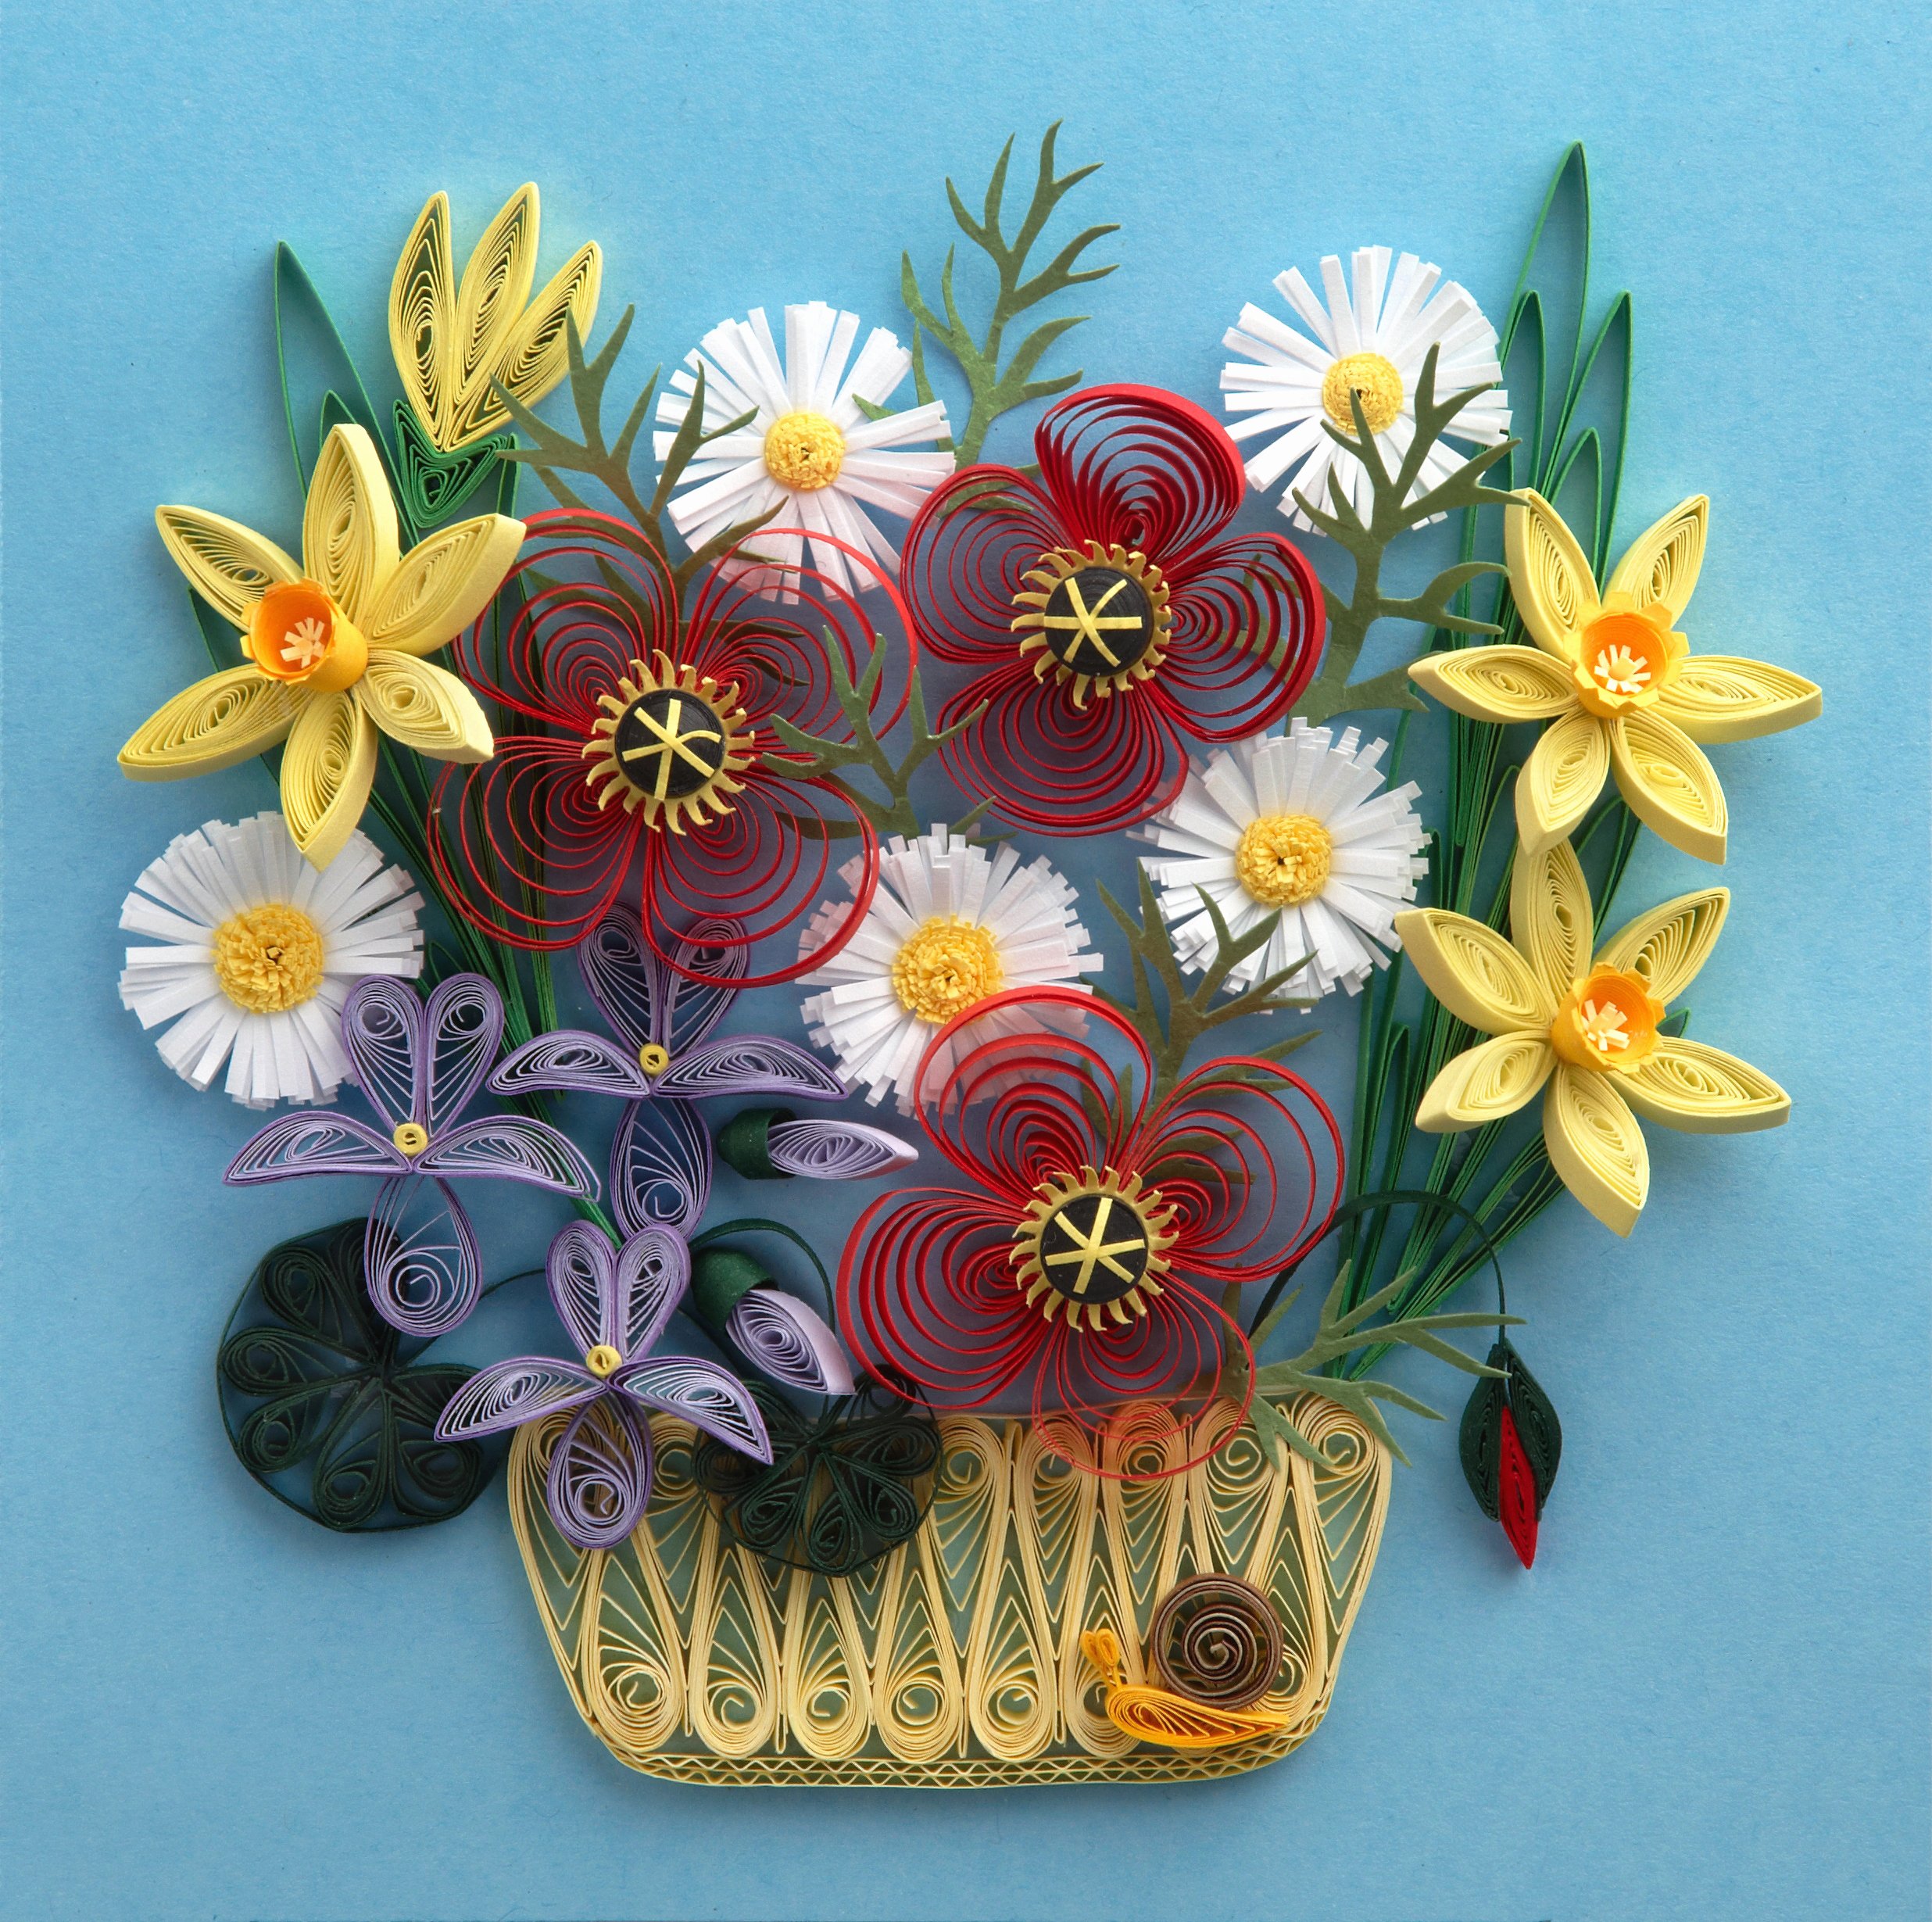 Paper Quilling Patterns Free Lovely 1000 Images About Paper Quilling Crafts On Pinterest